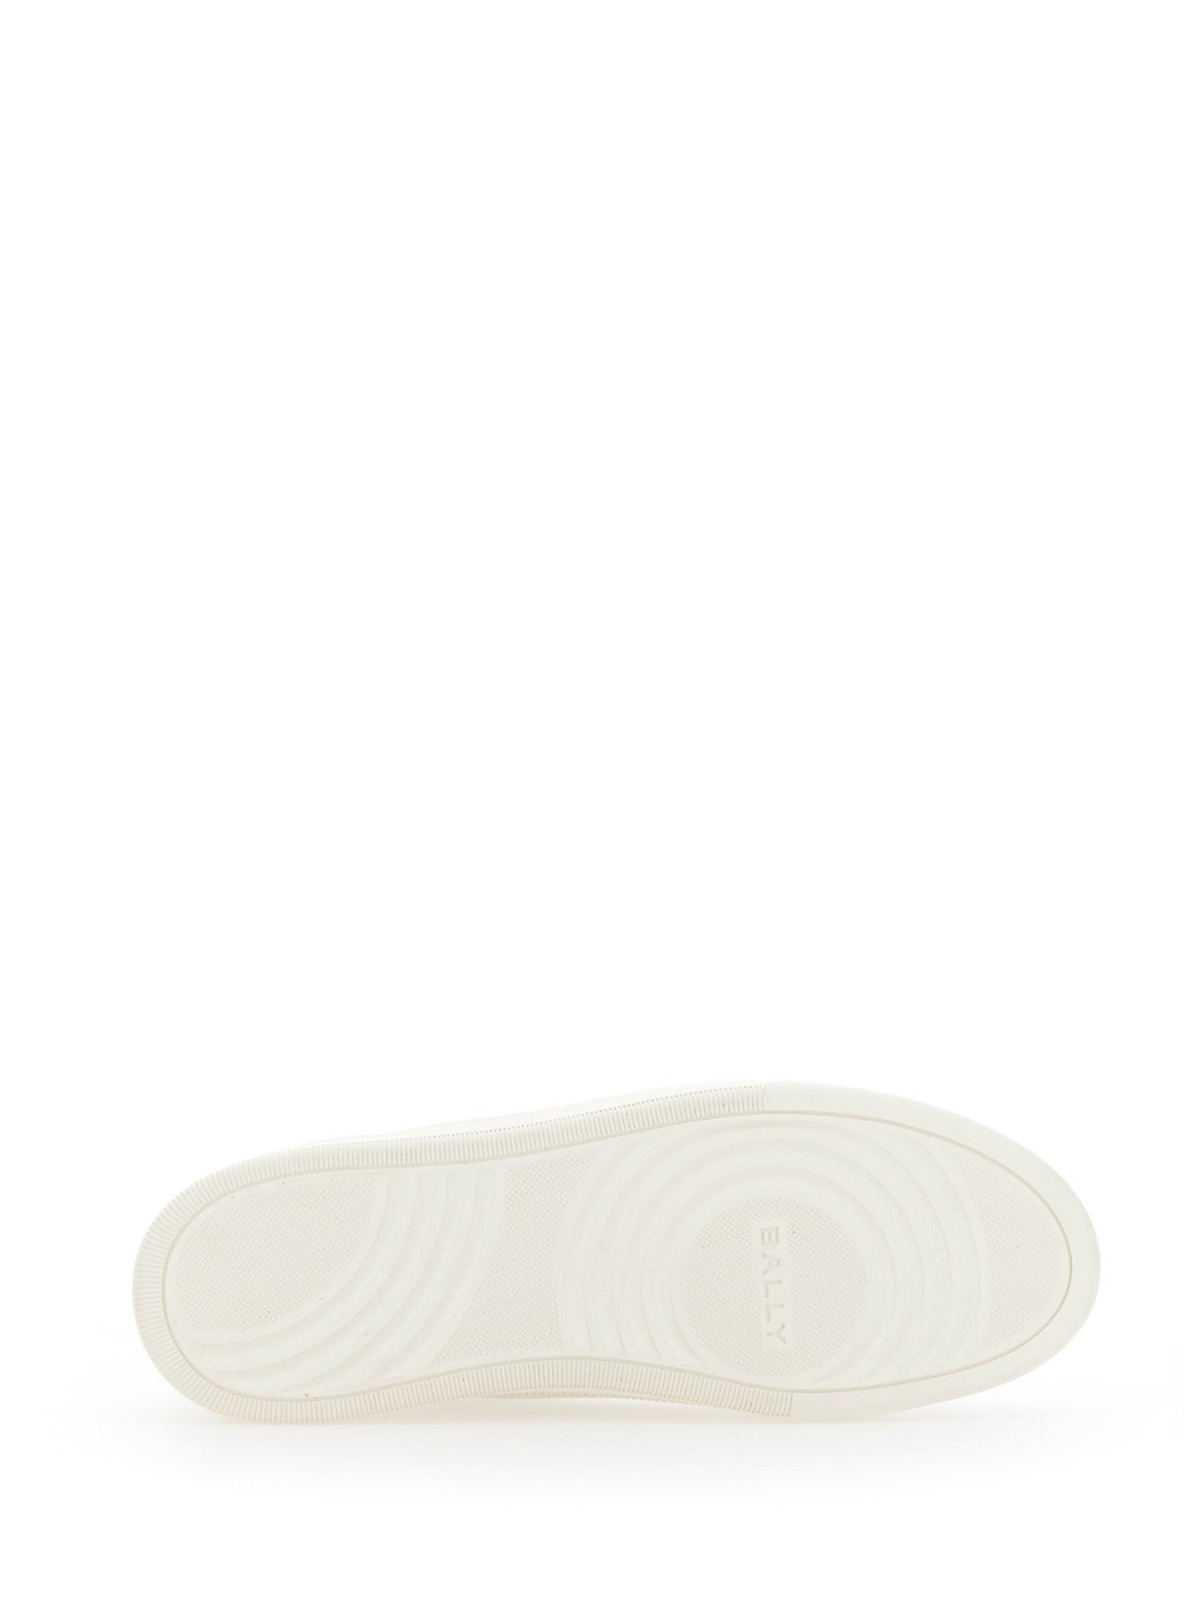 Shop Bally Raise Sneakers In White